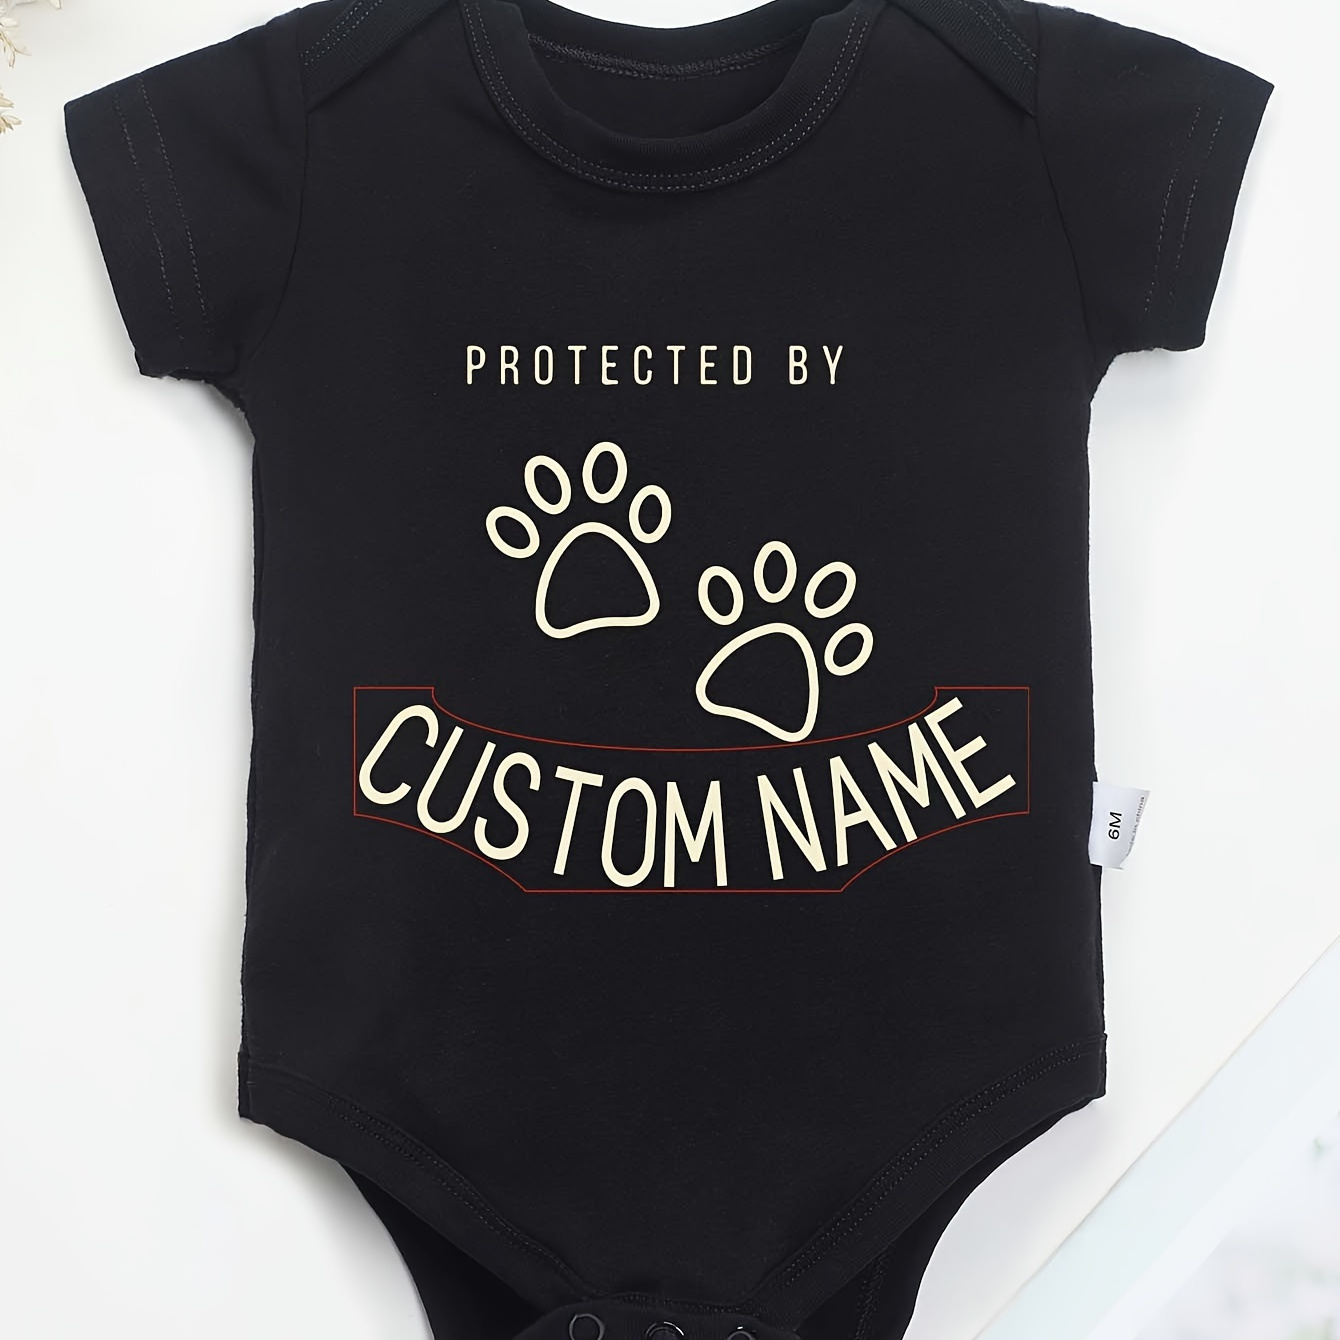 

Protect By Letters Print Customized Baby Boys & Girls Short Sleeve Triangle Romper 100% Cotton Bodysuit Onesies Top Baby Summer Gifts